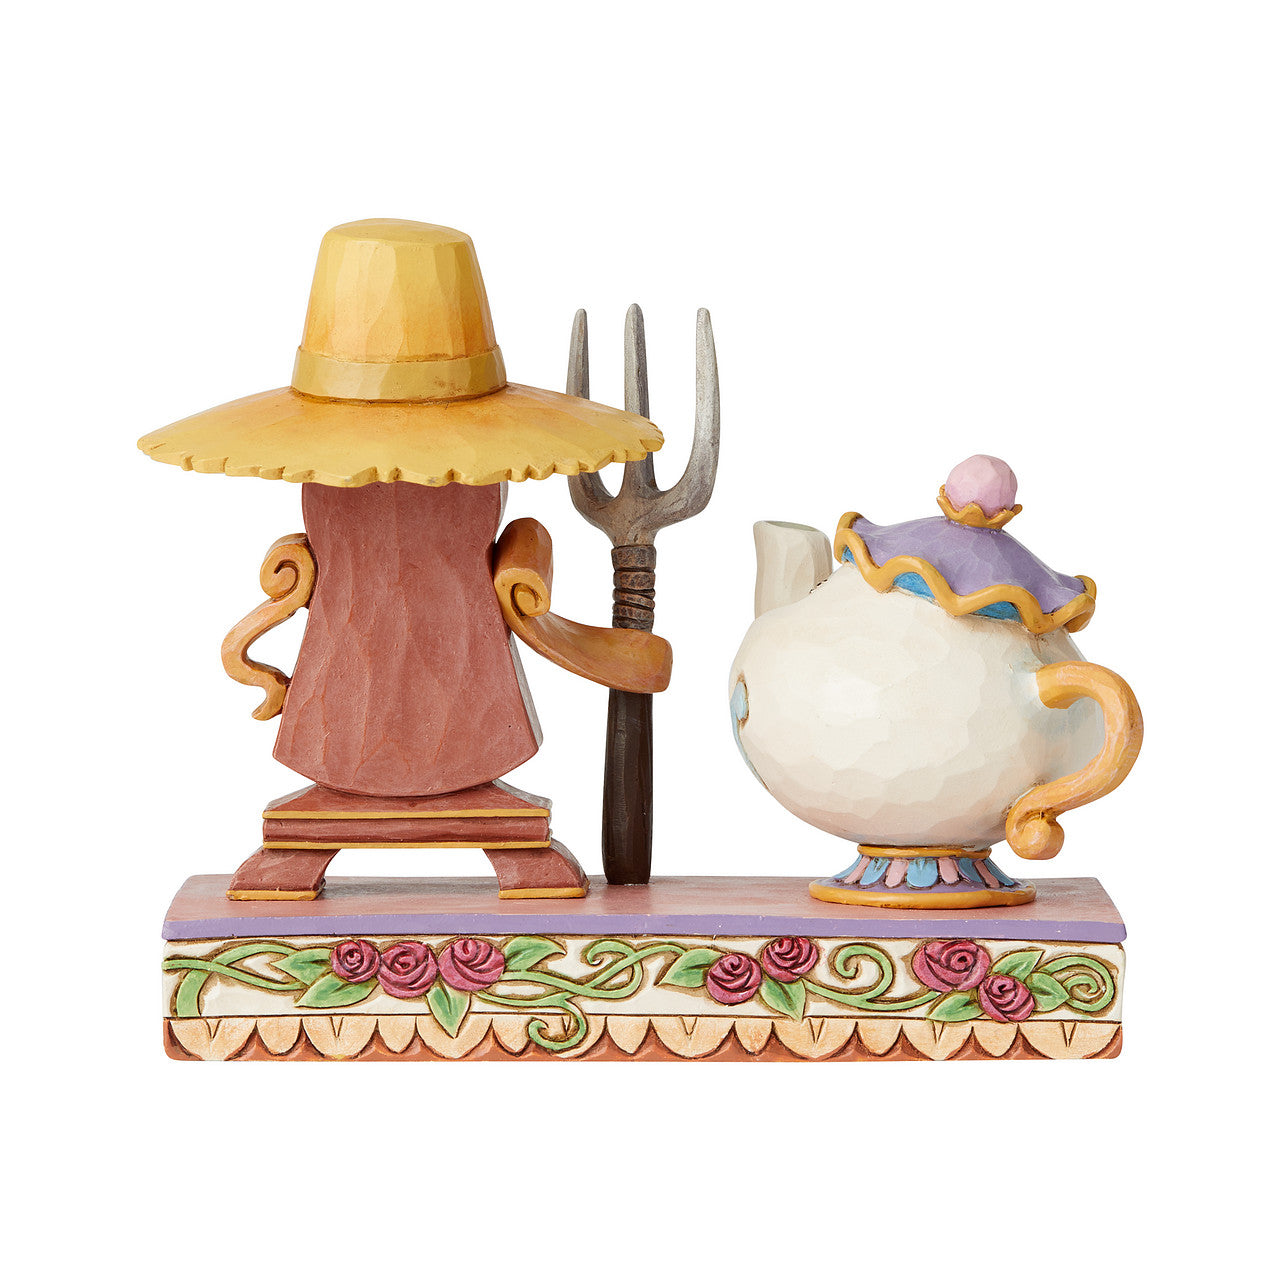 Working Round the Clock - Mrs Potts and Cogsworth